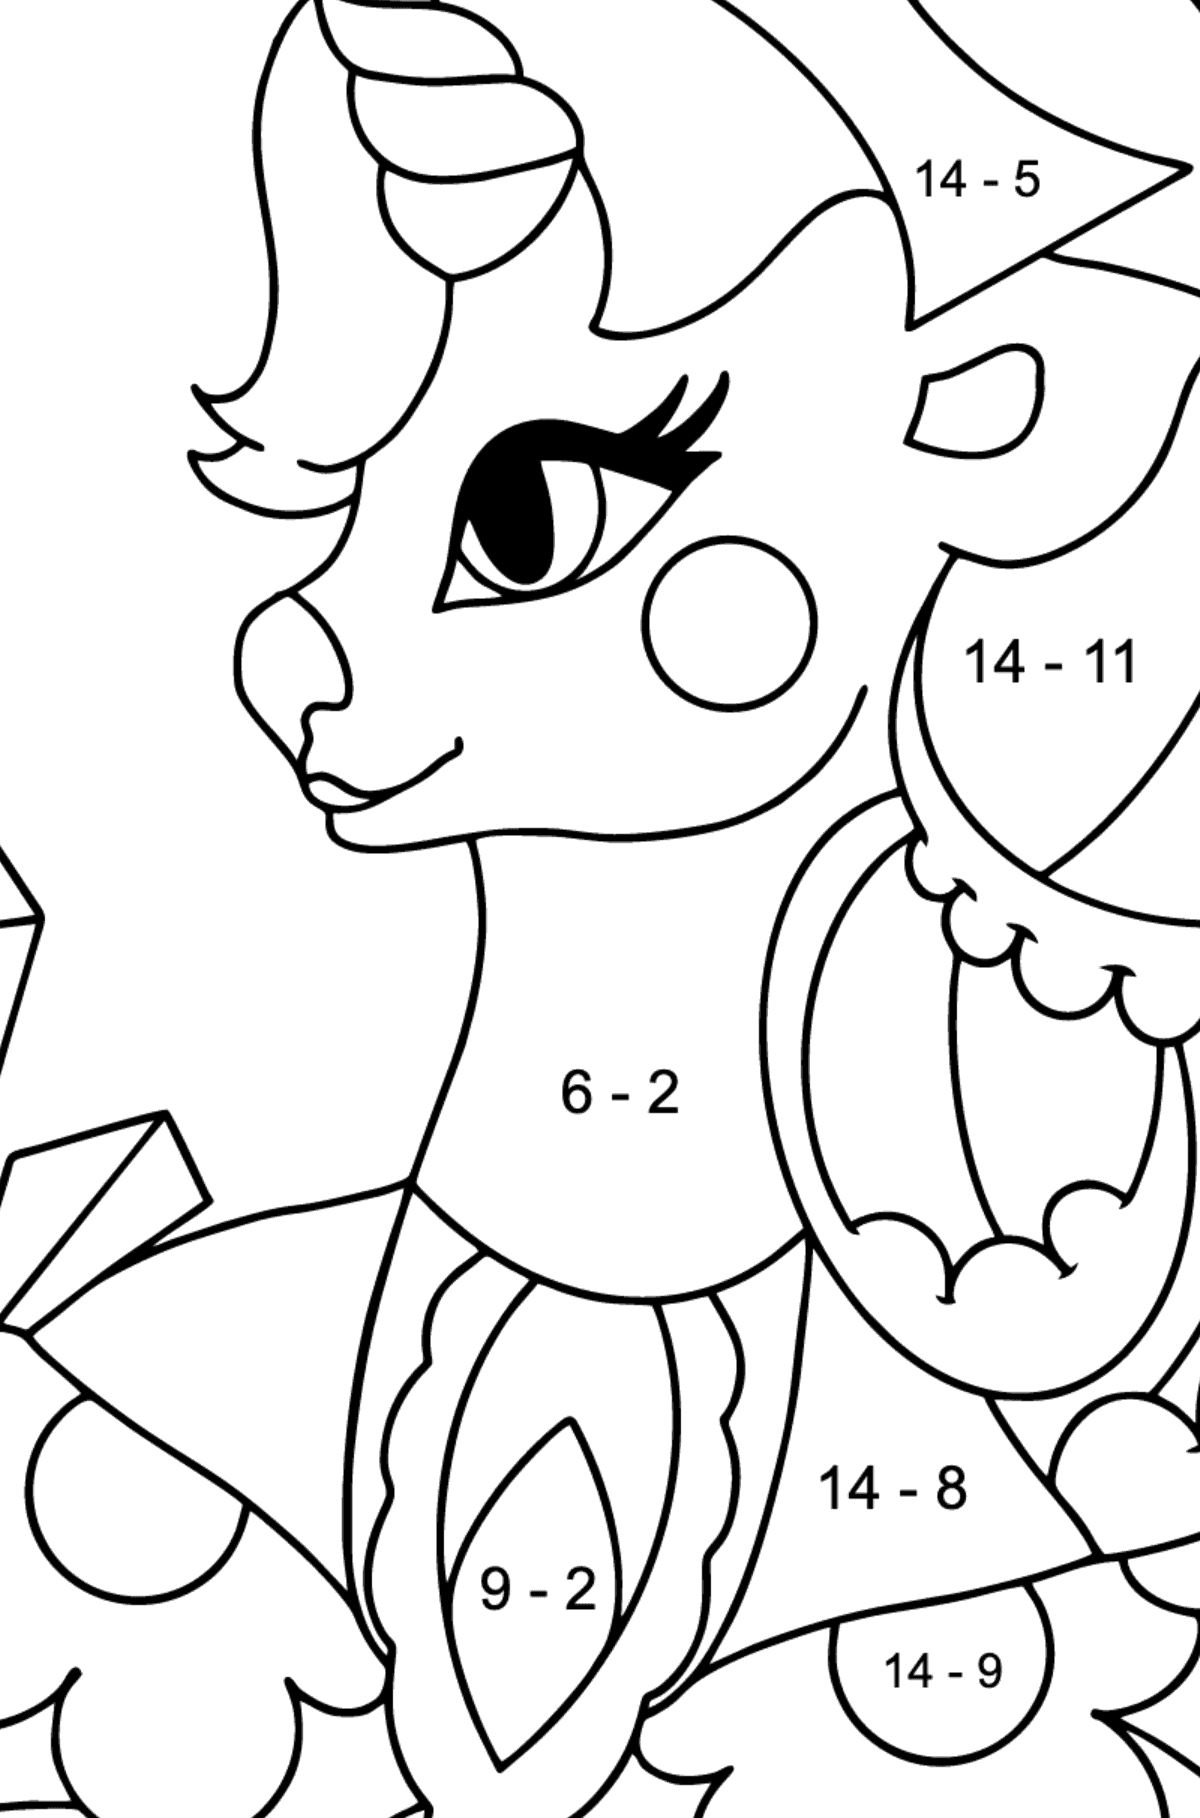 Cute Unicorn colouring page - Math Coloring - Subtraction for Kids